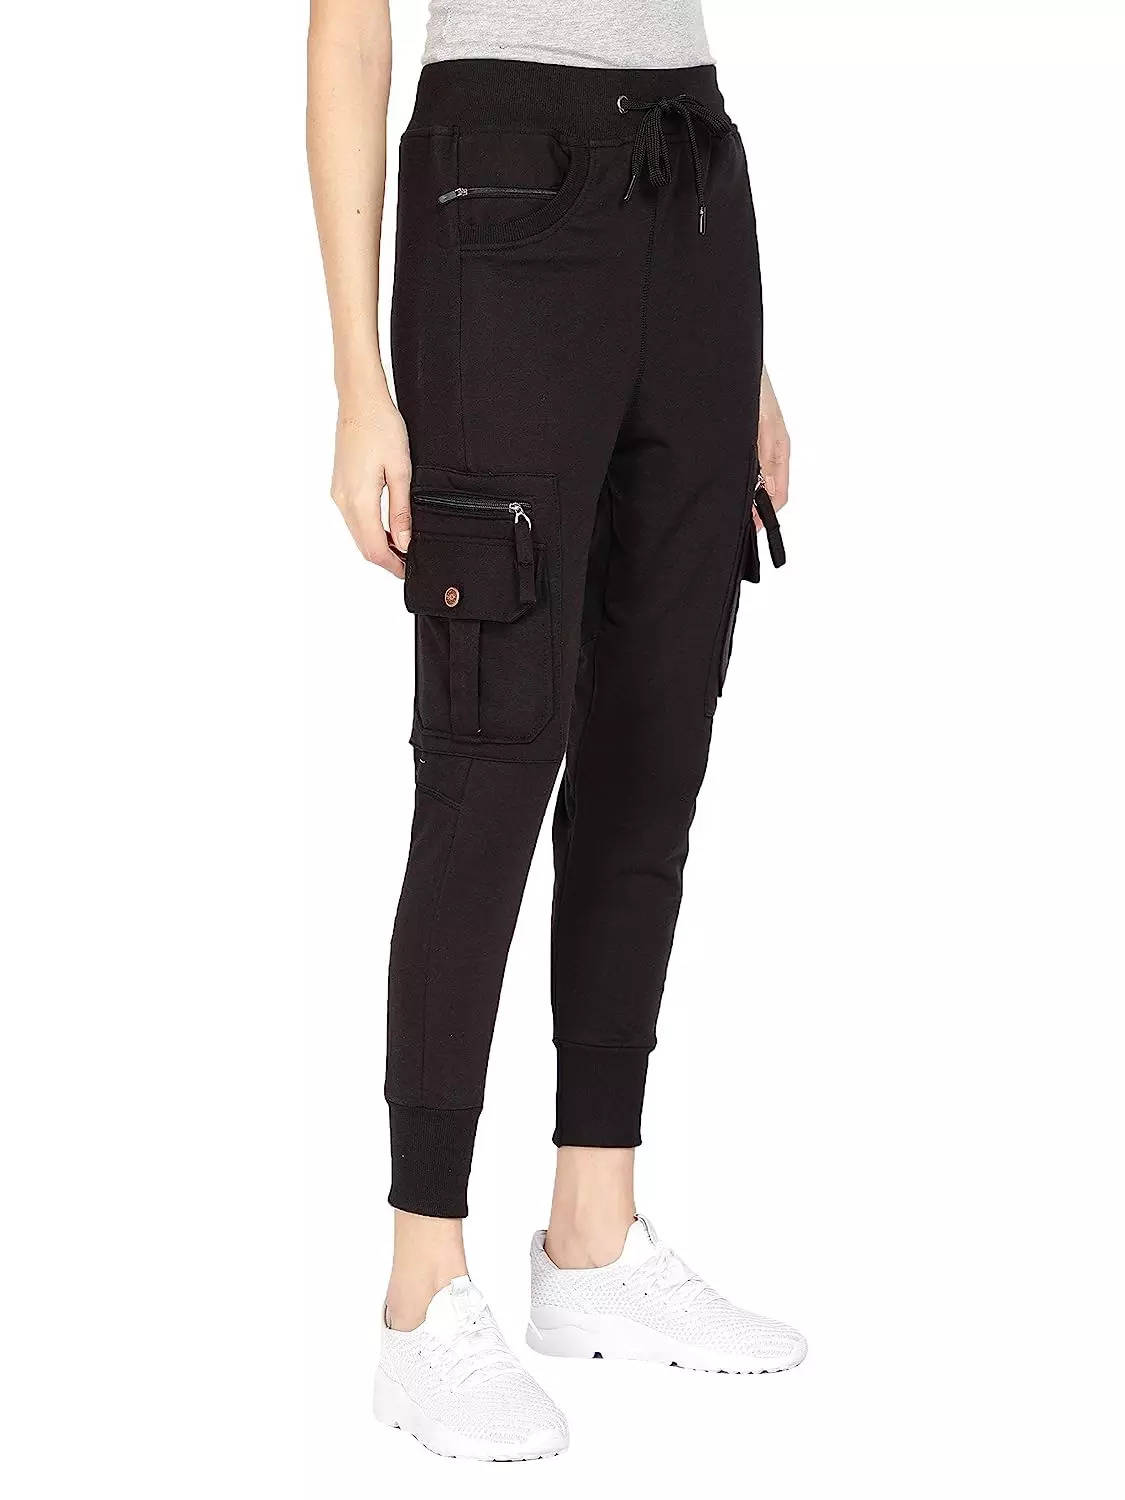 Womens High Waist Cargo Pants Slim Fit Casual Jogger Trousers with Pockets